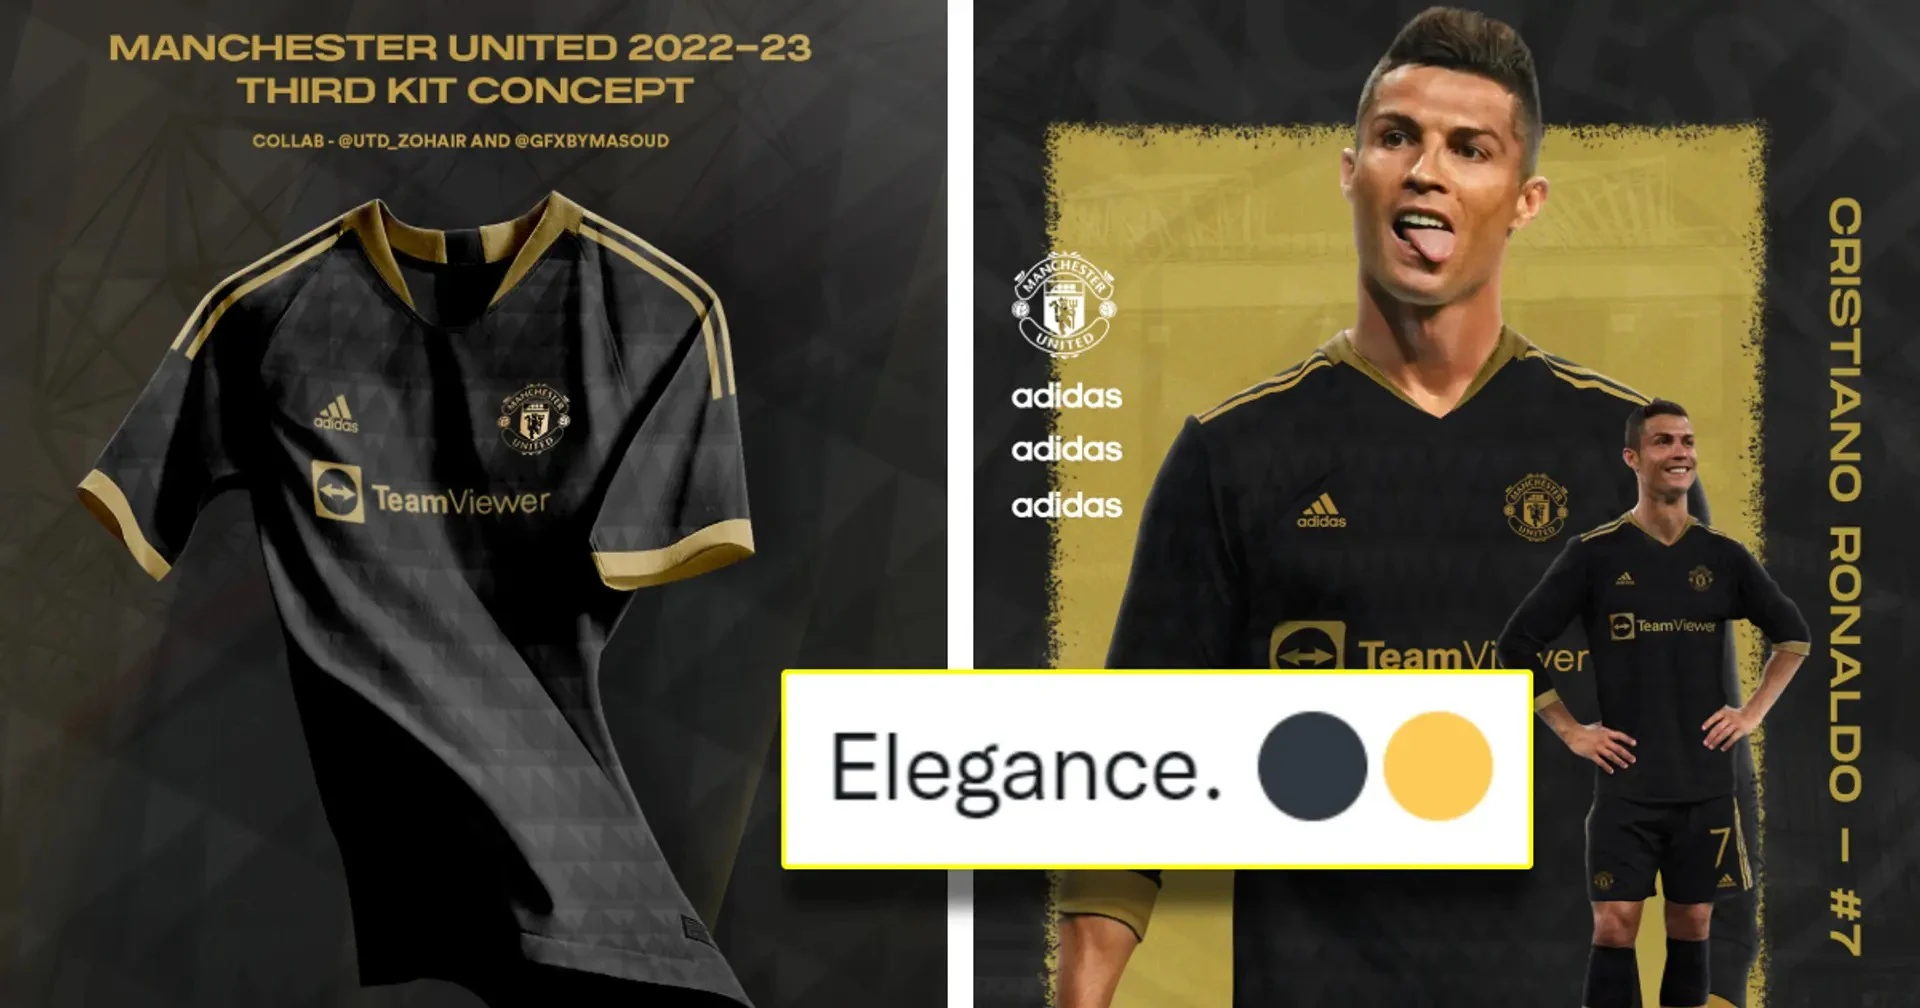 'I'd buy this even if we get relegated': Man United fans in love with epic black-and-gold concept kit